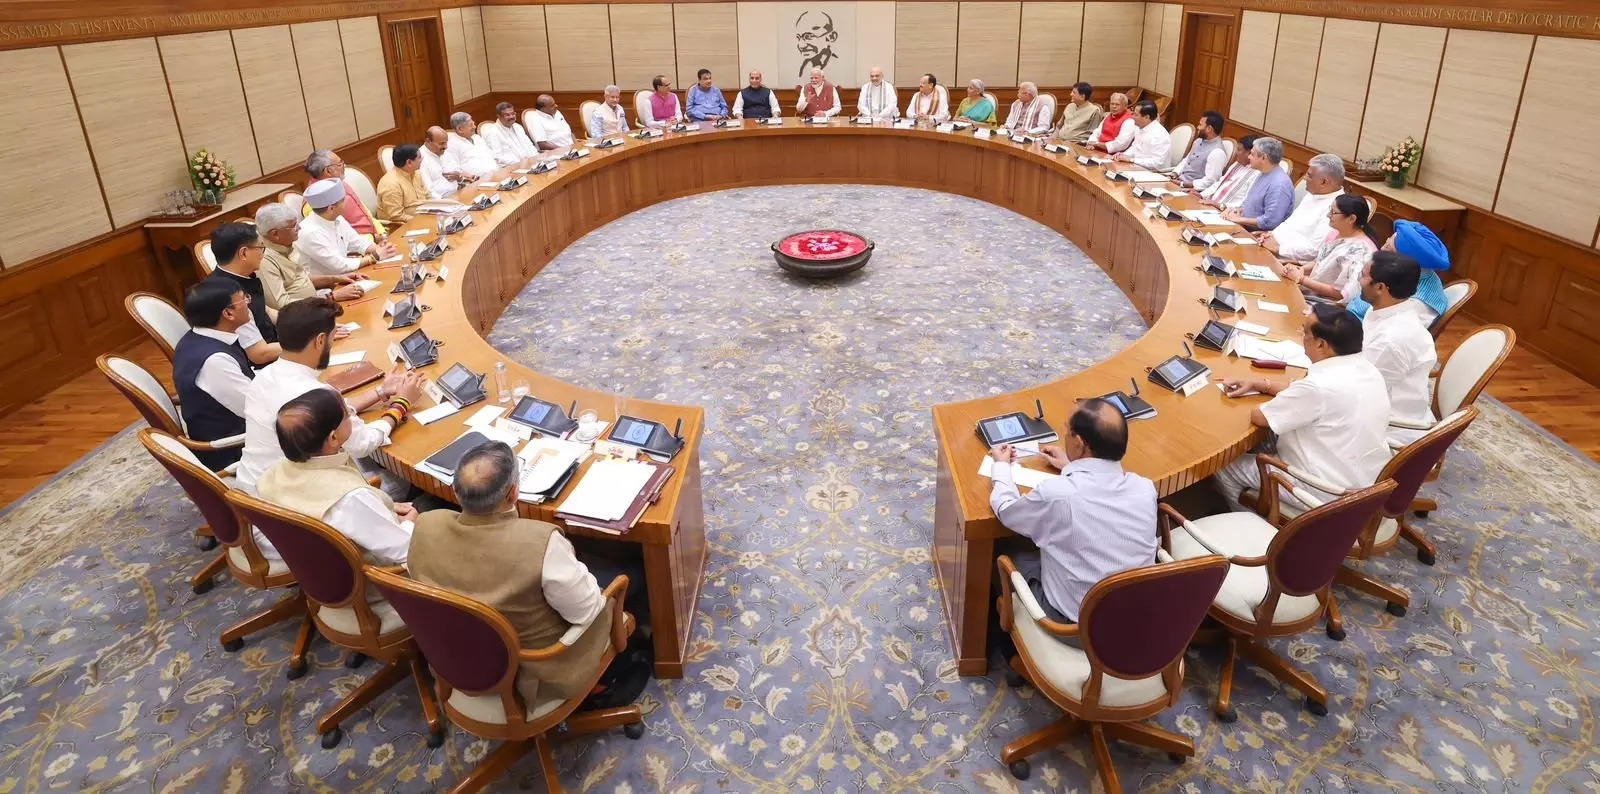 Union Cabinet meet tomorrow at 10:30 AM ahead of Budget session: Report 